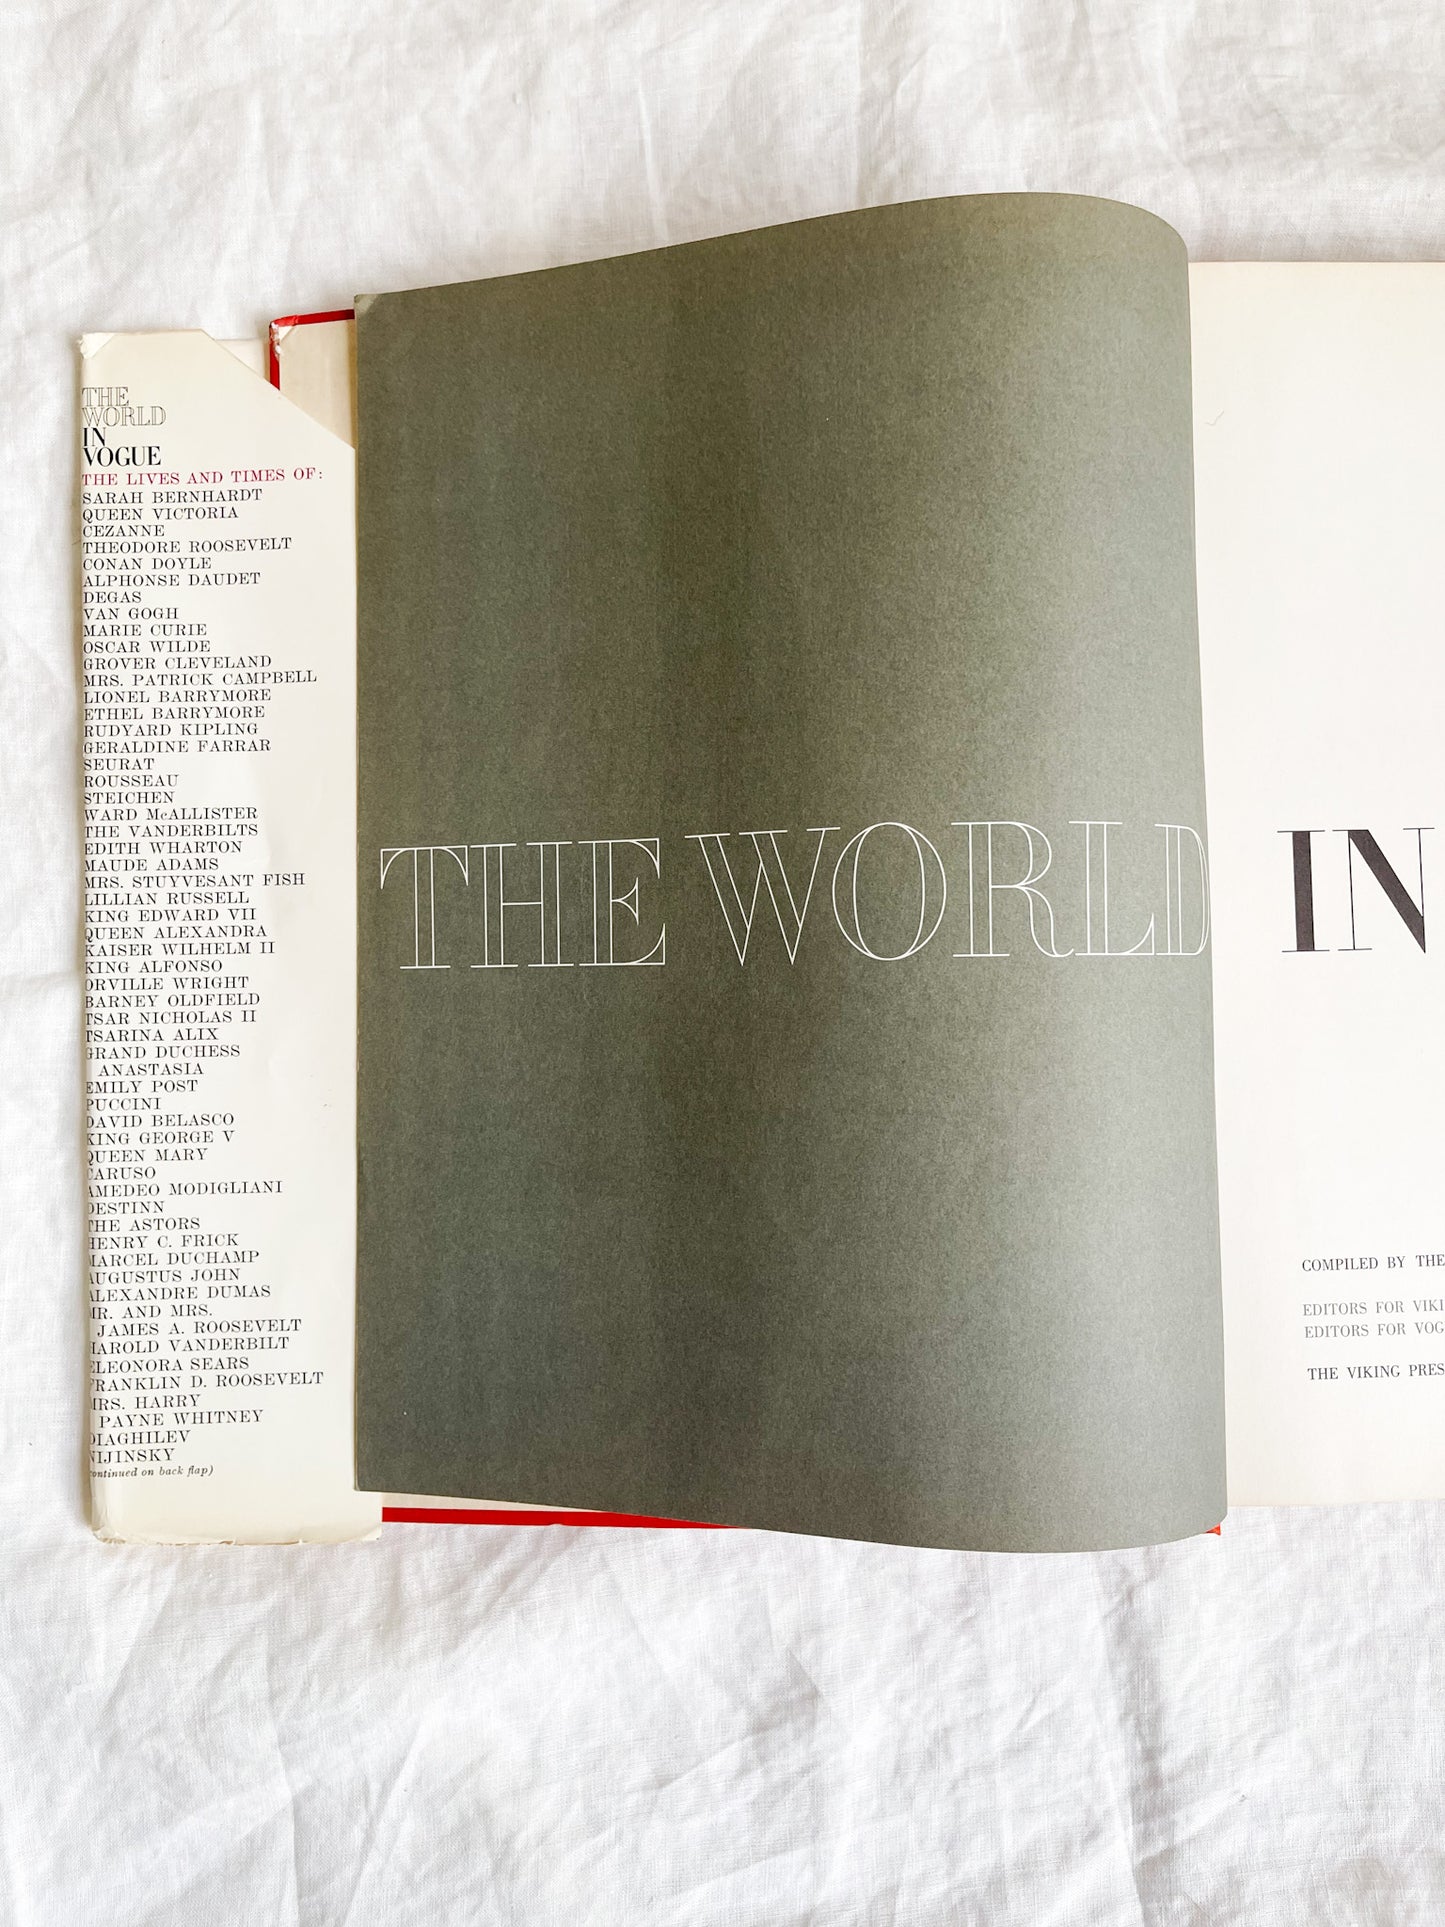 Vintage Book "The World In Vogue"